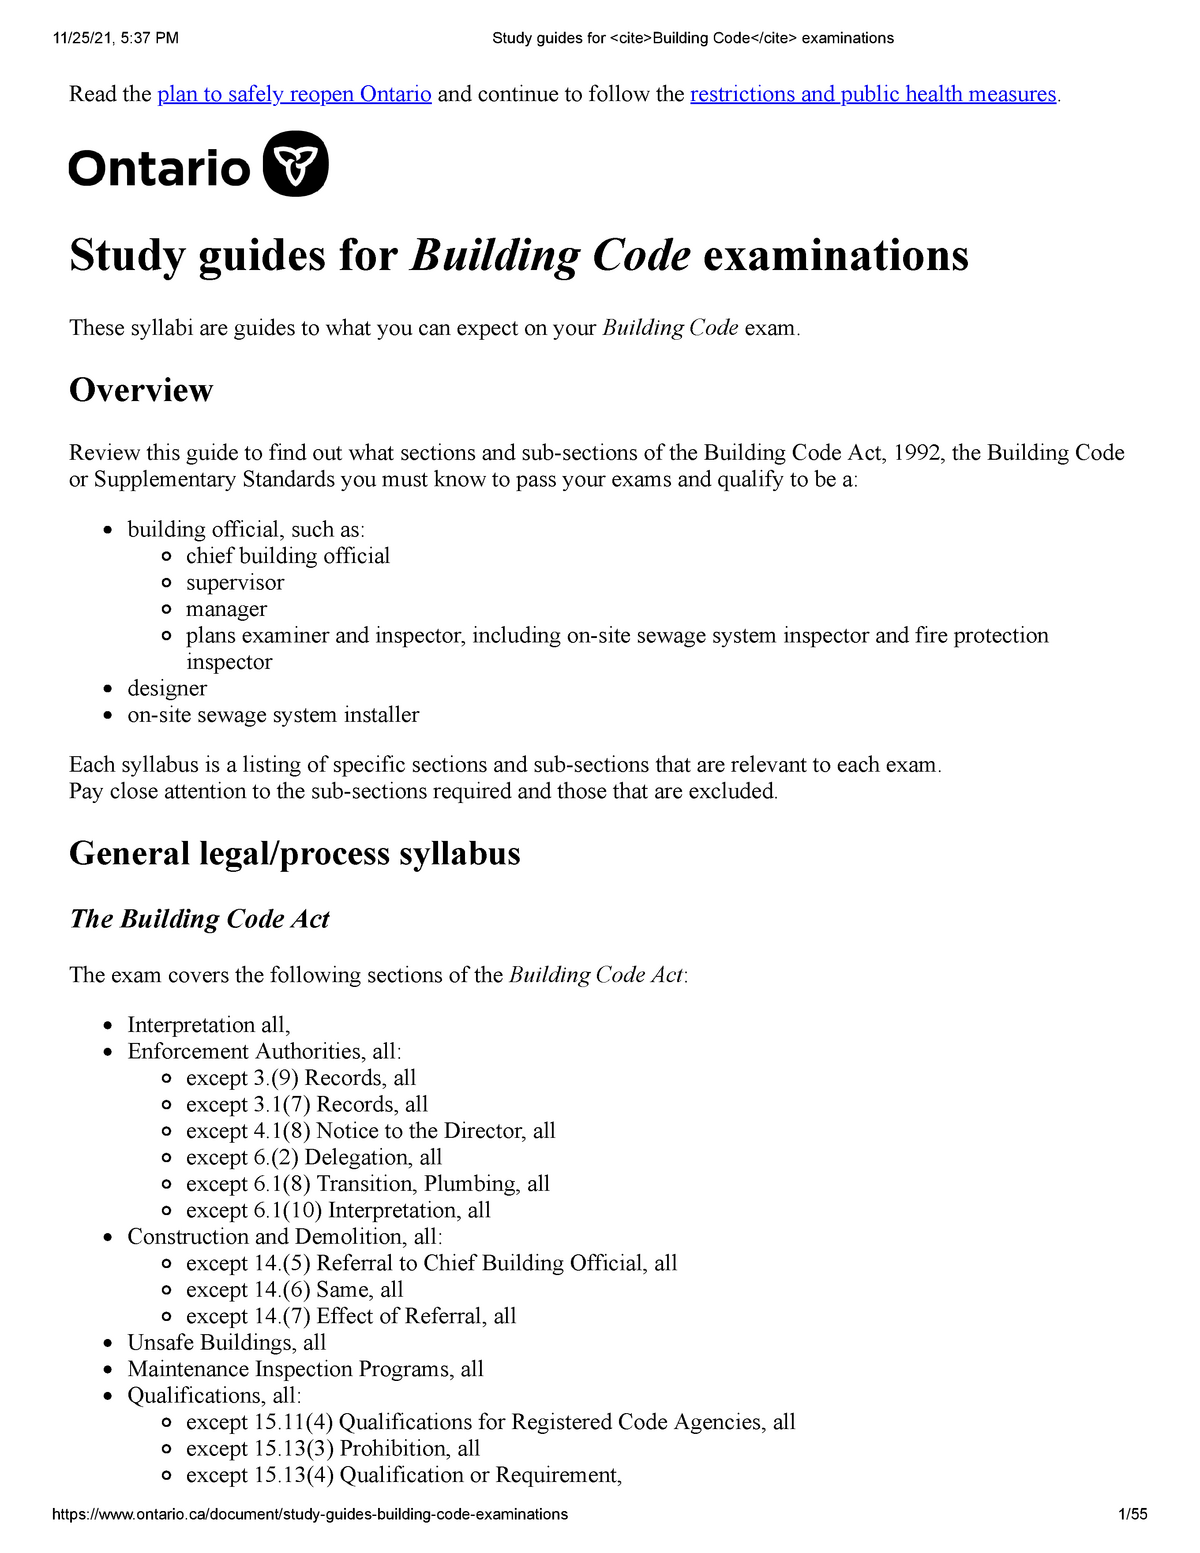 division c section 3.1.4 of the ontario building code